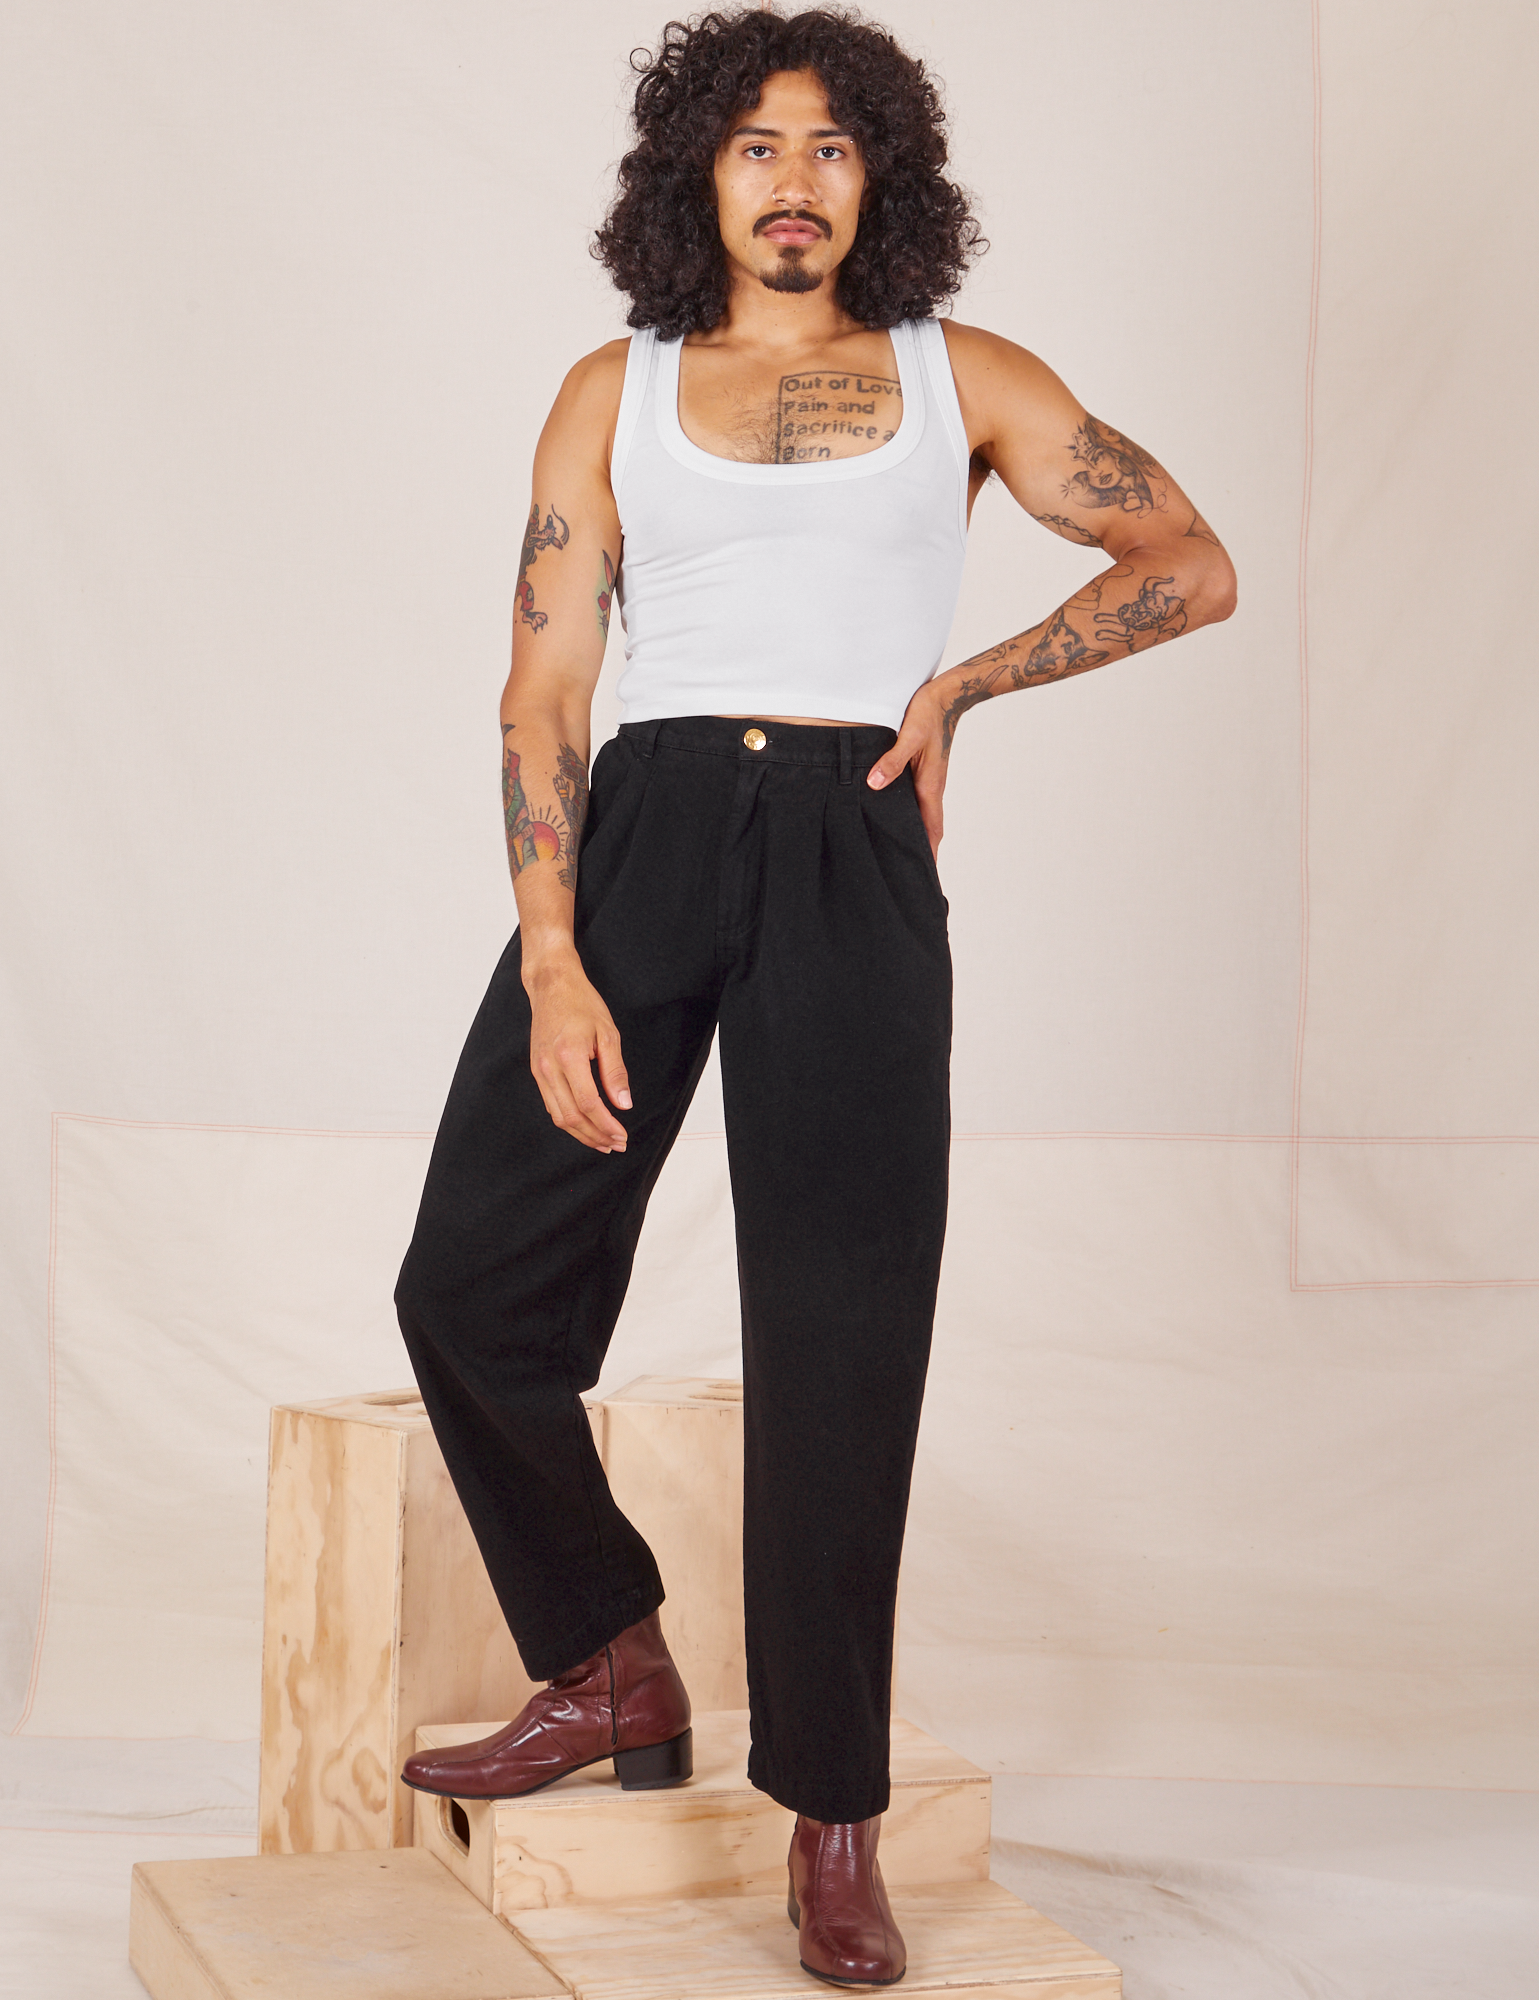 Jesse is 5&#39;8&quot; and wearing XXS Heavyweight Trousers in Basic Black paired with vintage off-white Cropped Tank Top.